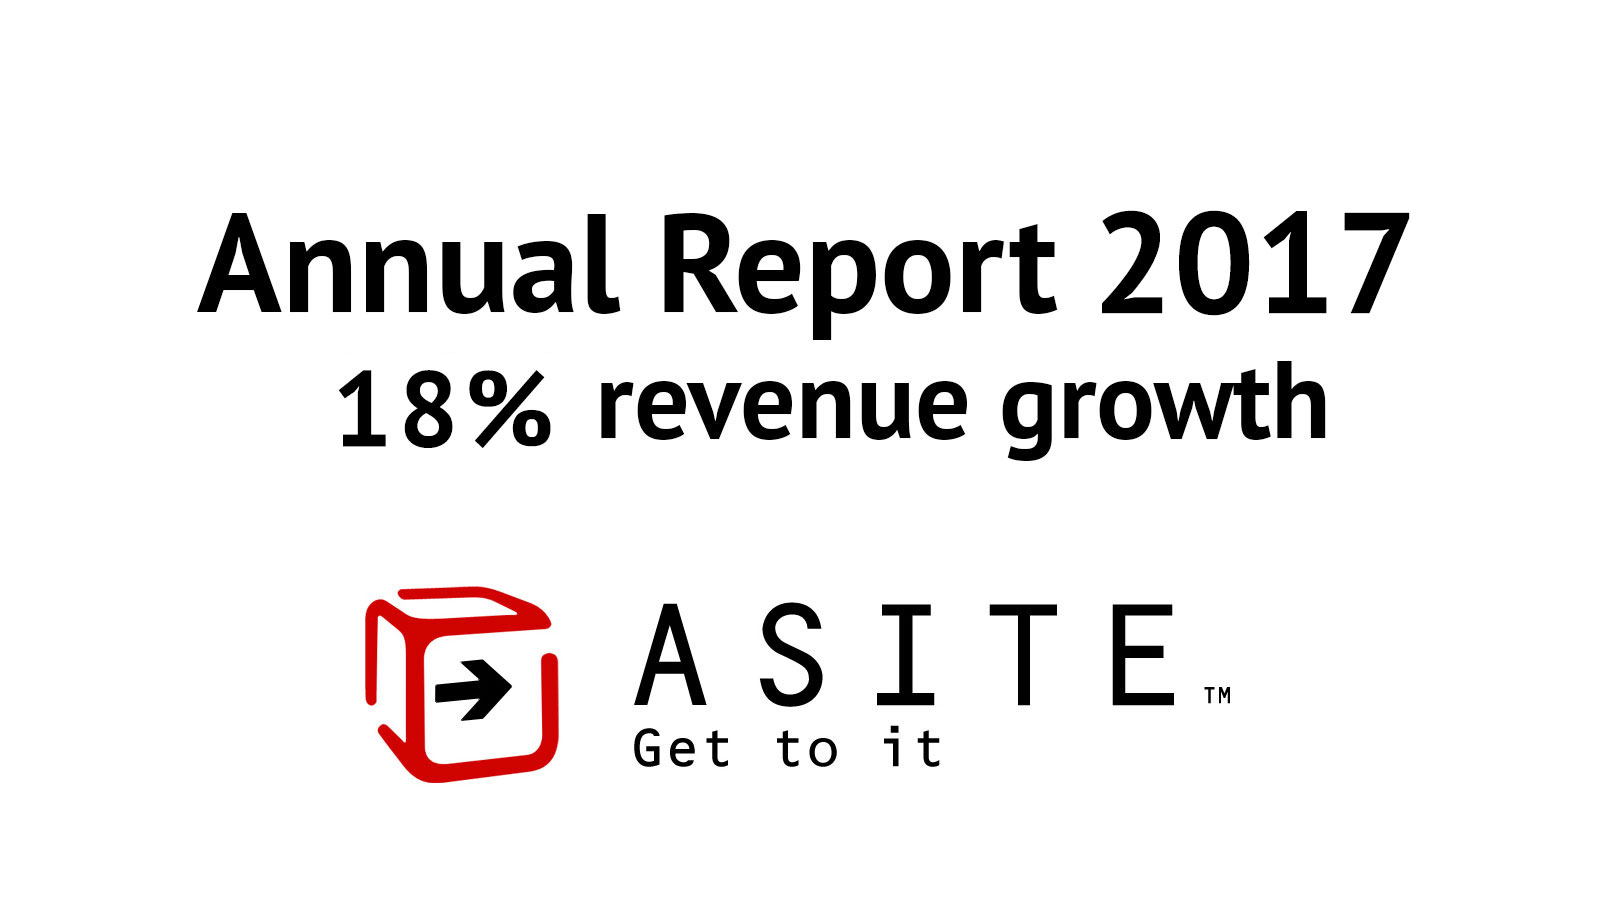 Asite announces 18% revenue growth in its 2017 Annual Report